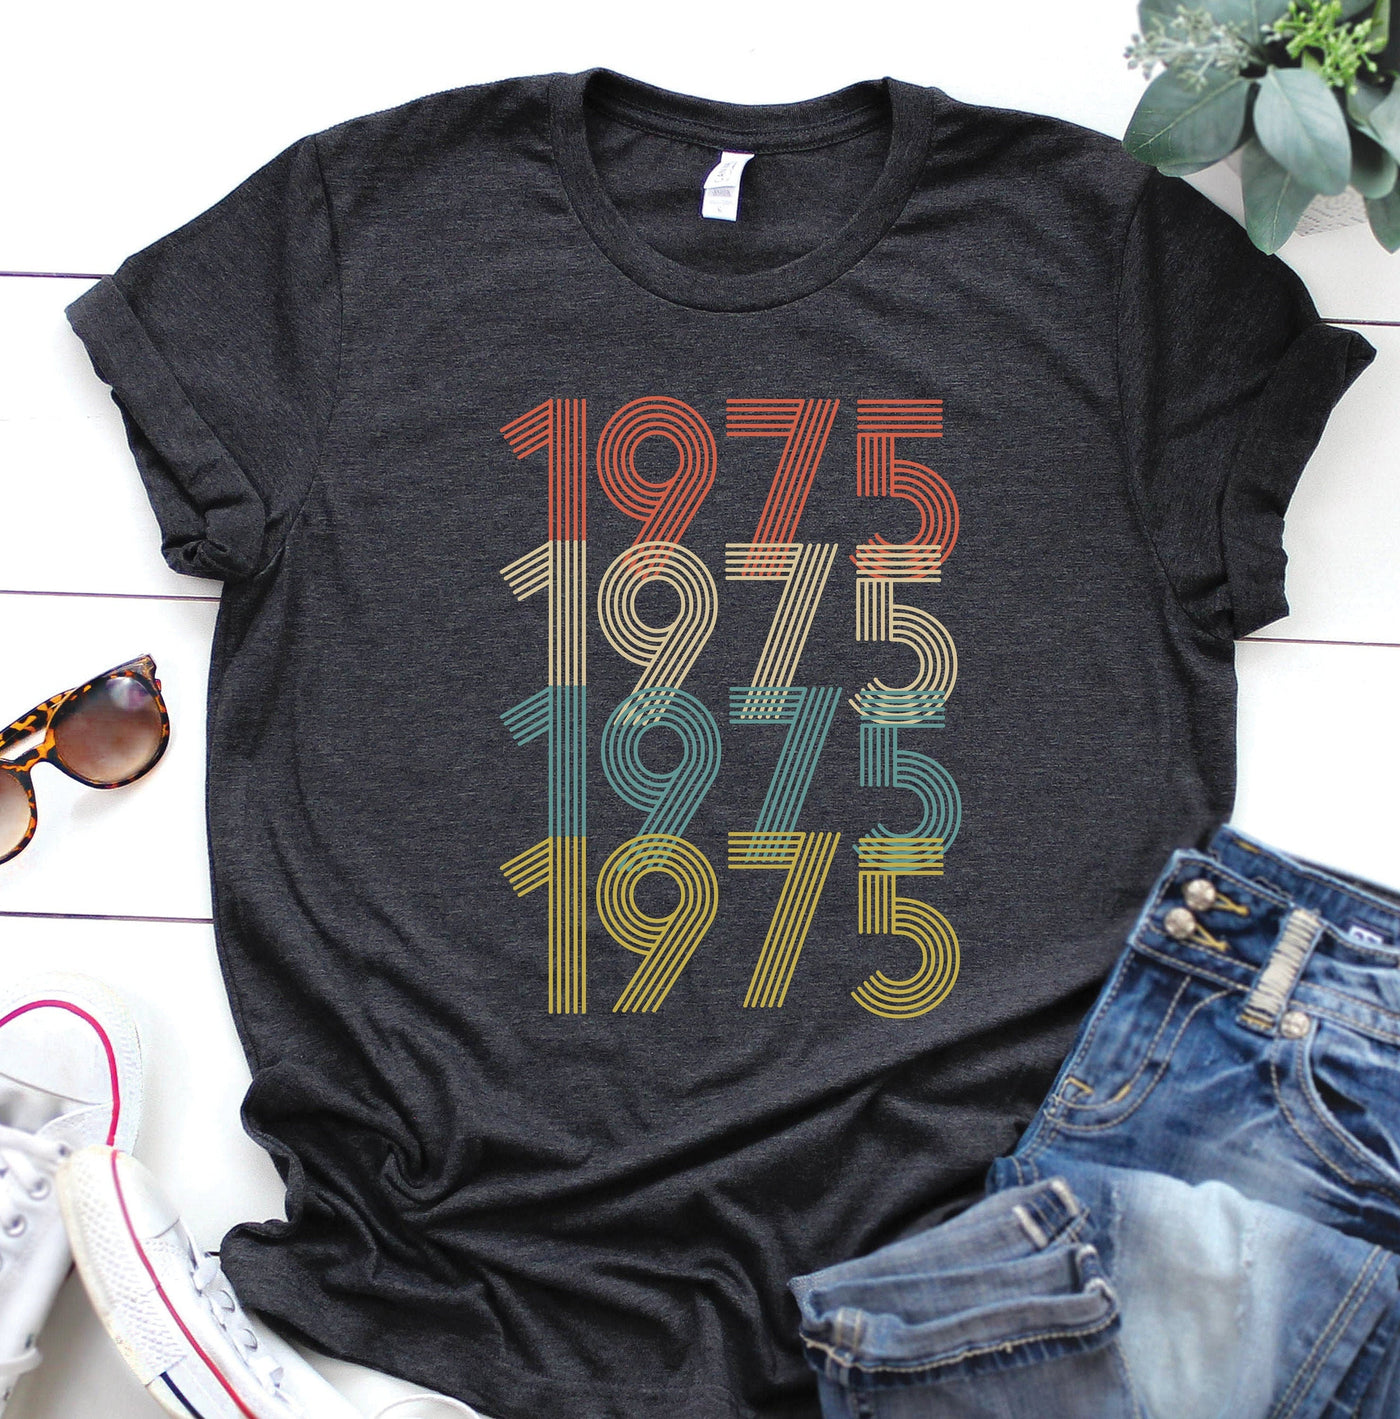 Vintage 1975 Shirt, 48th Birthday, gift for her